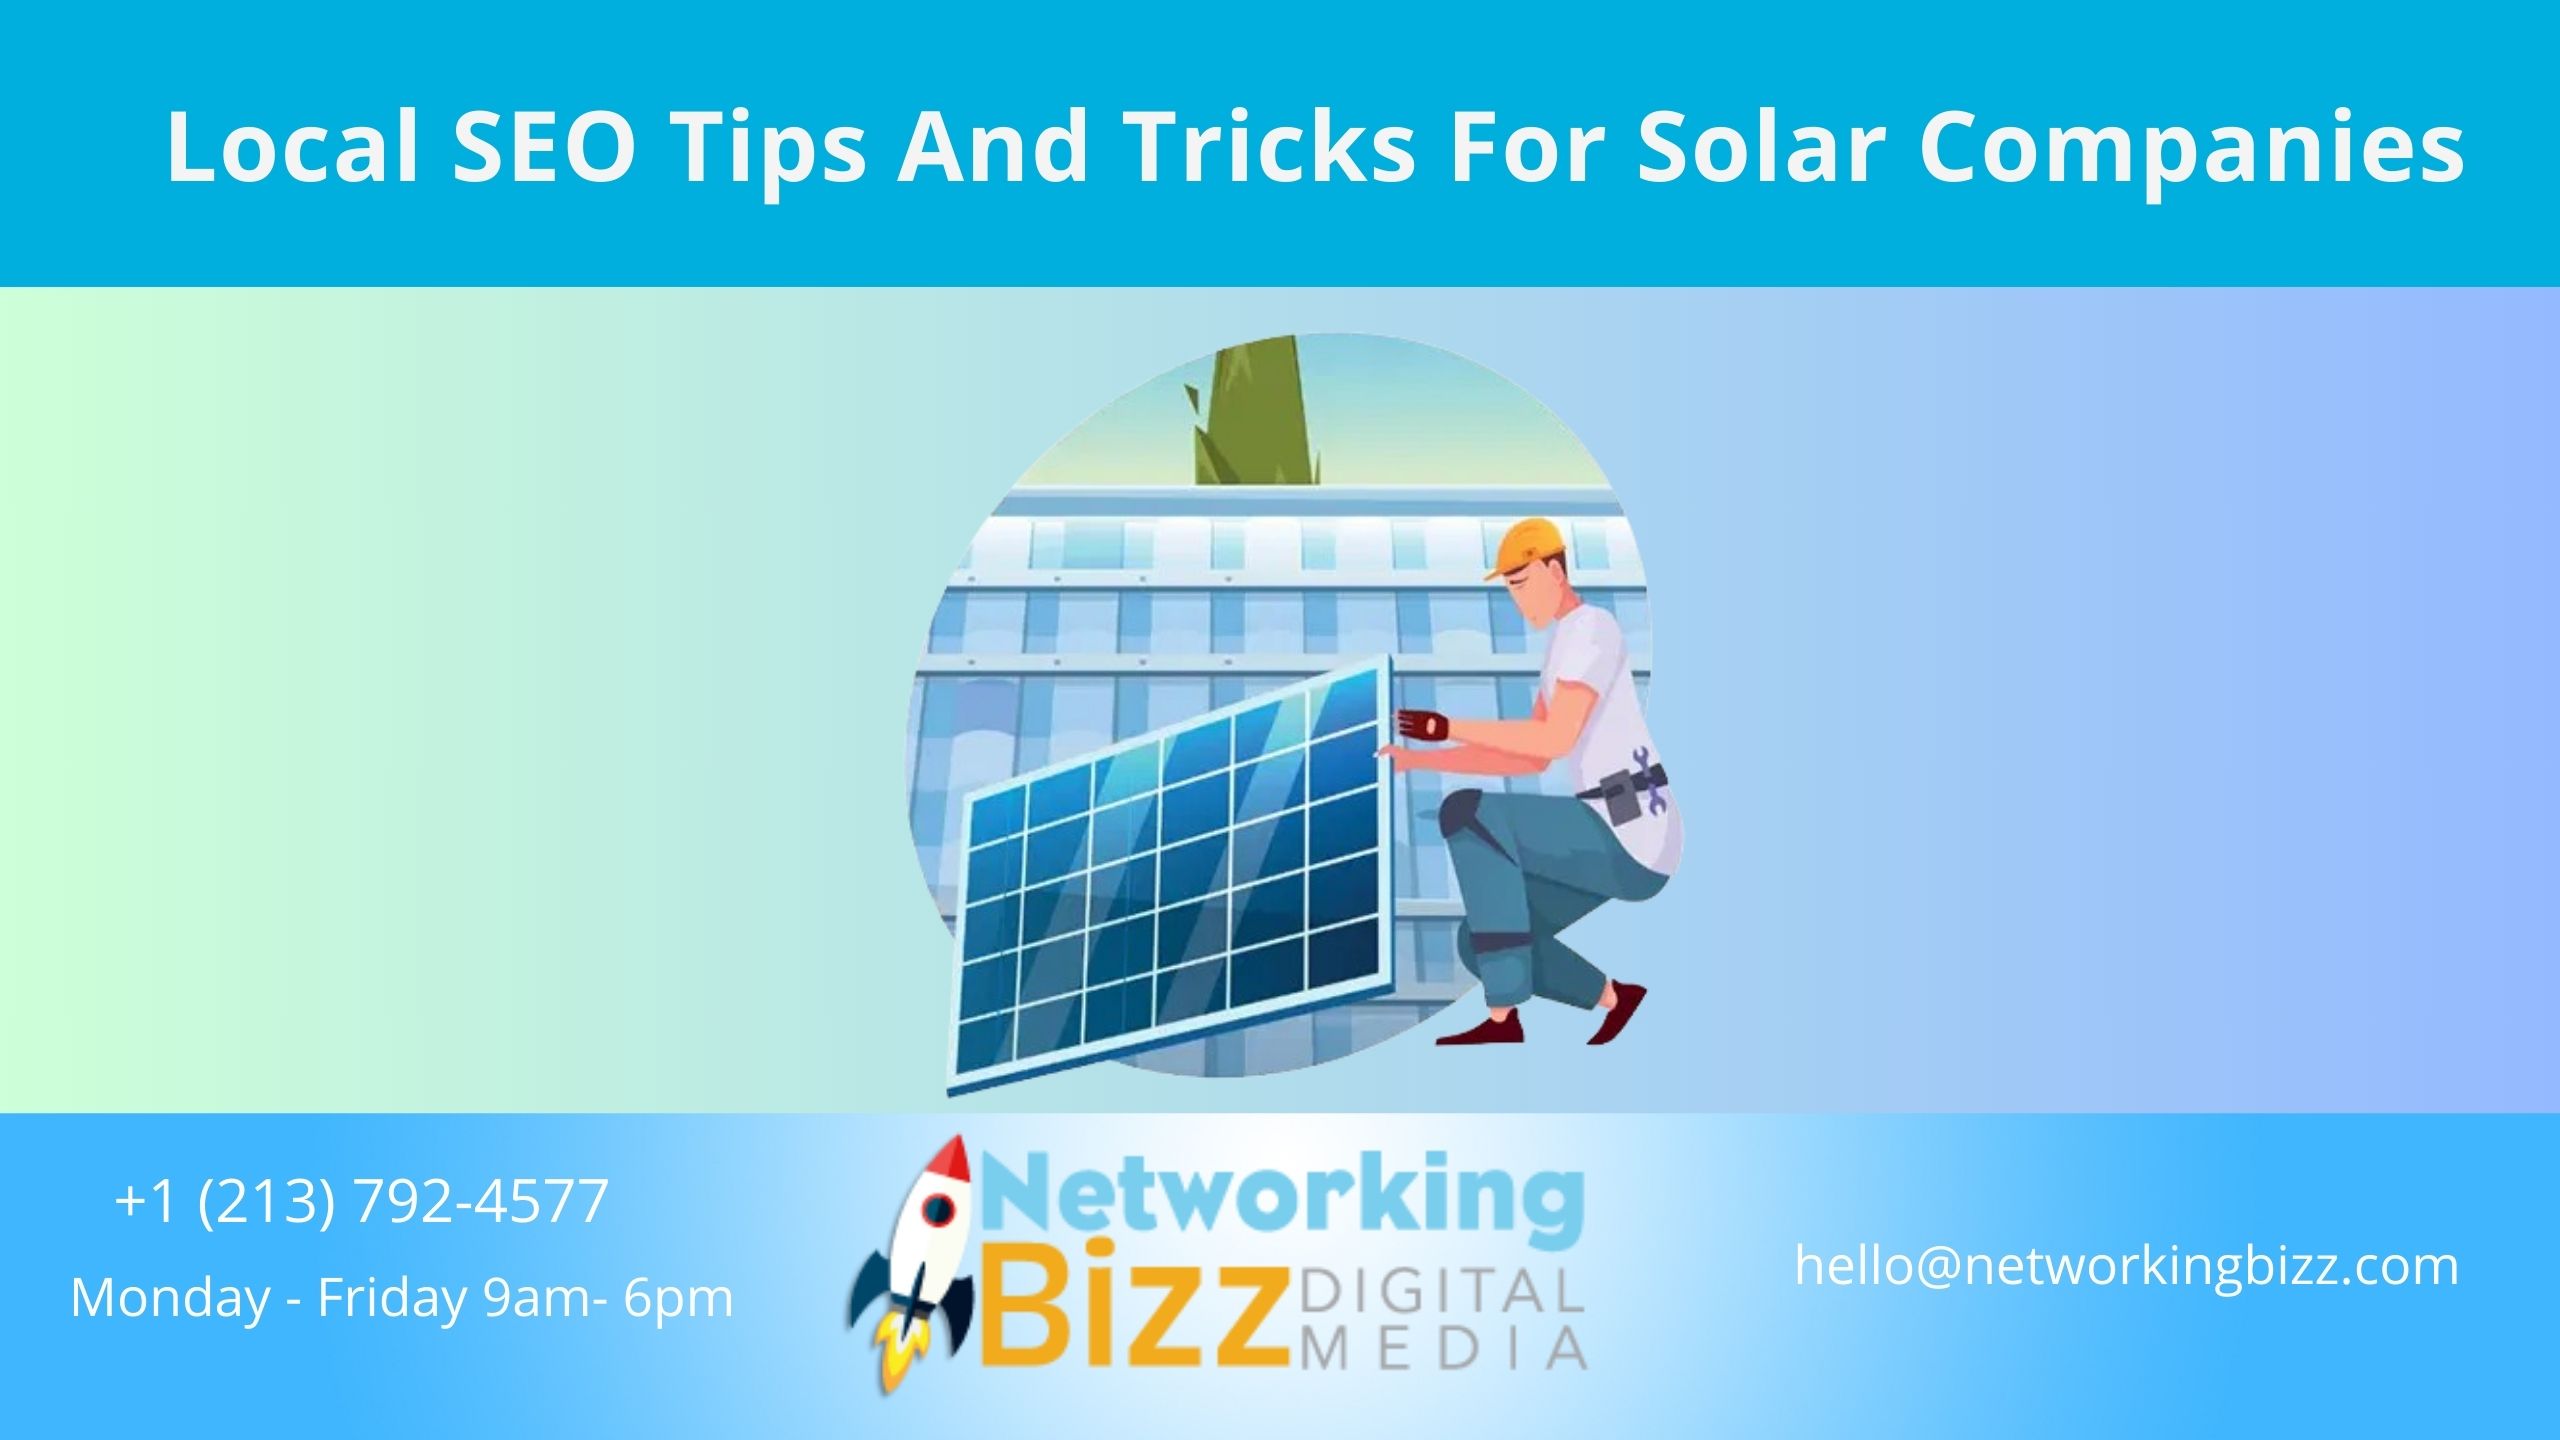 Local SEO Tips And Tricks For Solar Companies